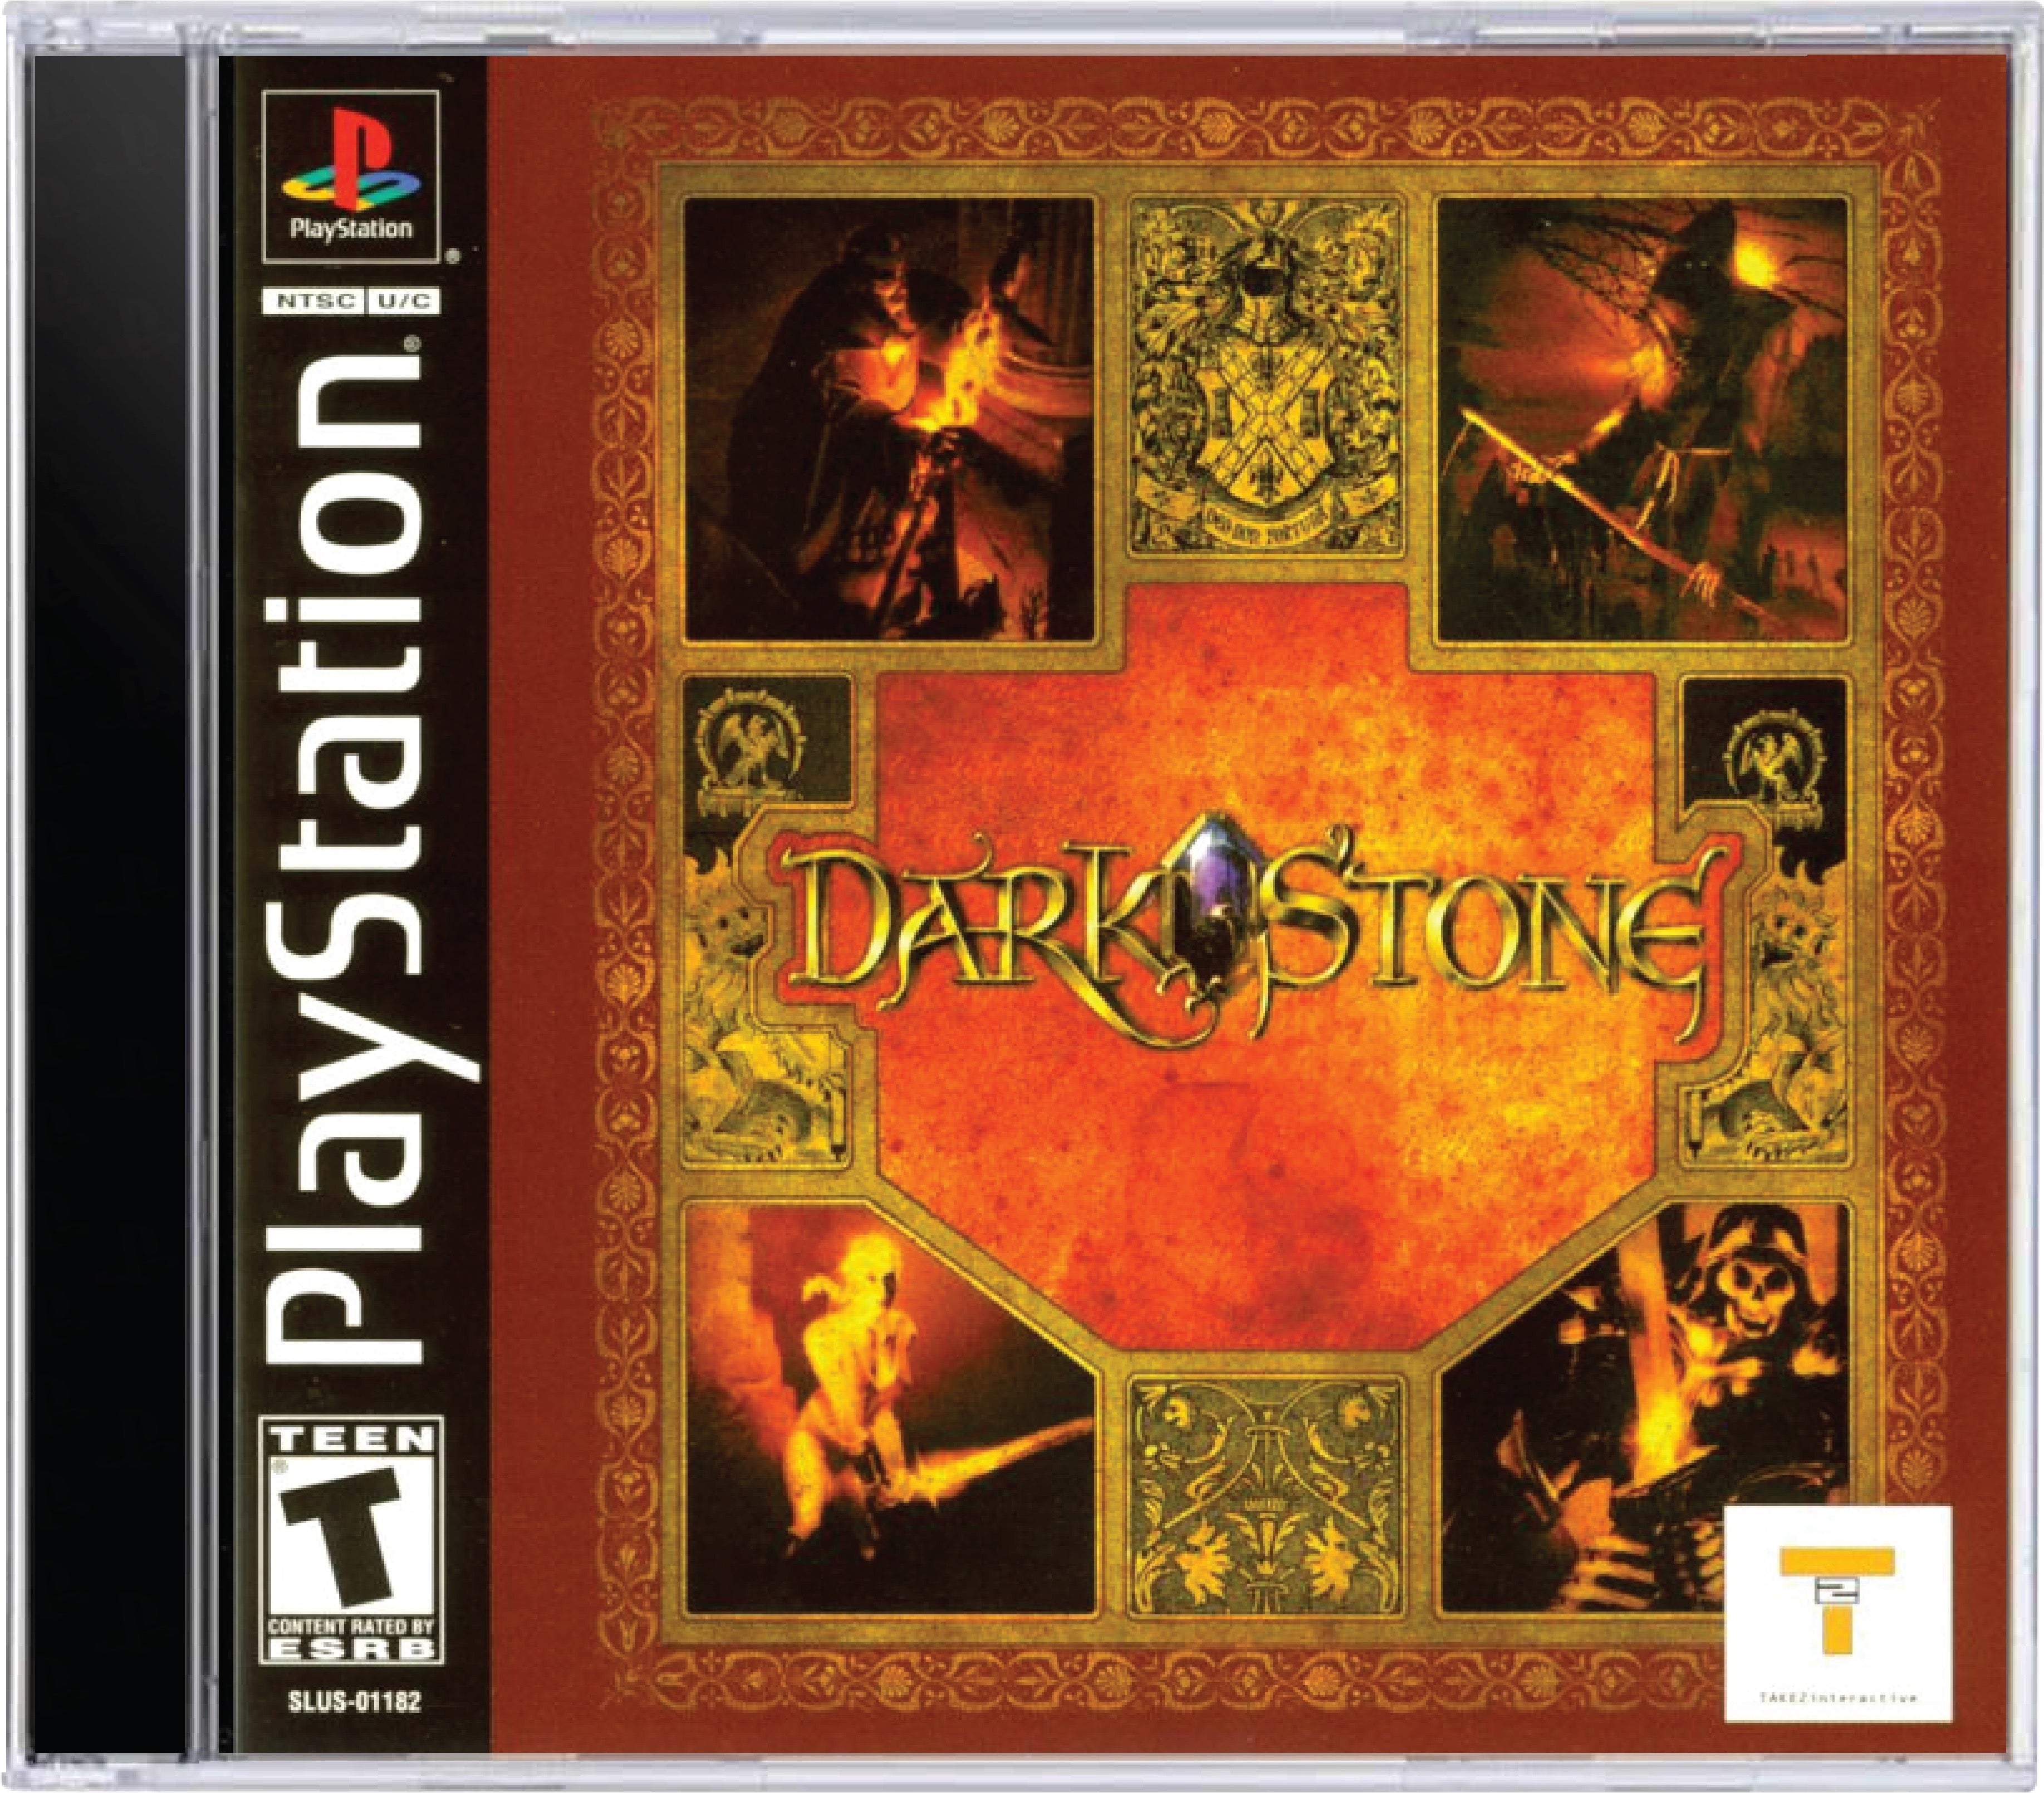 Darkstone Cover Art and Product Photo